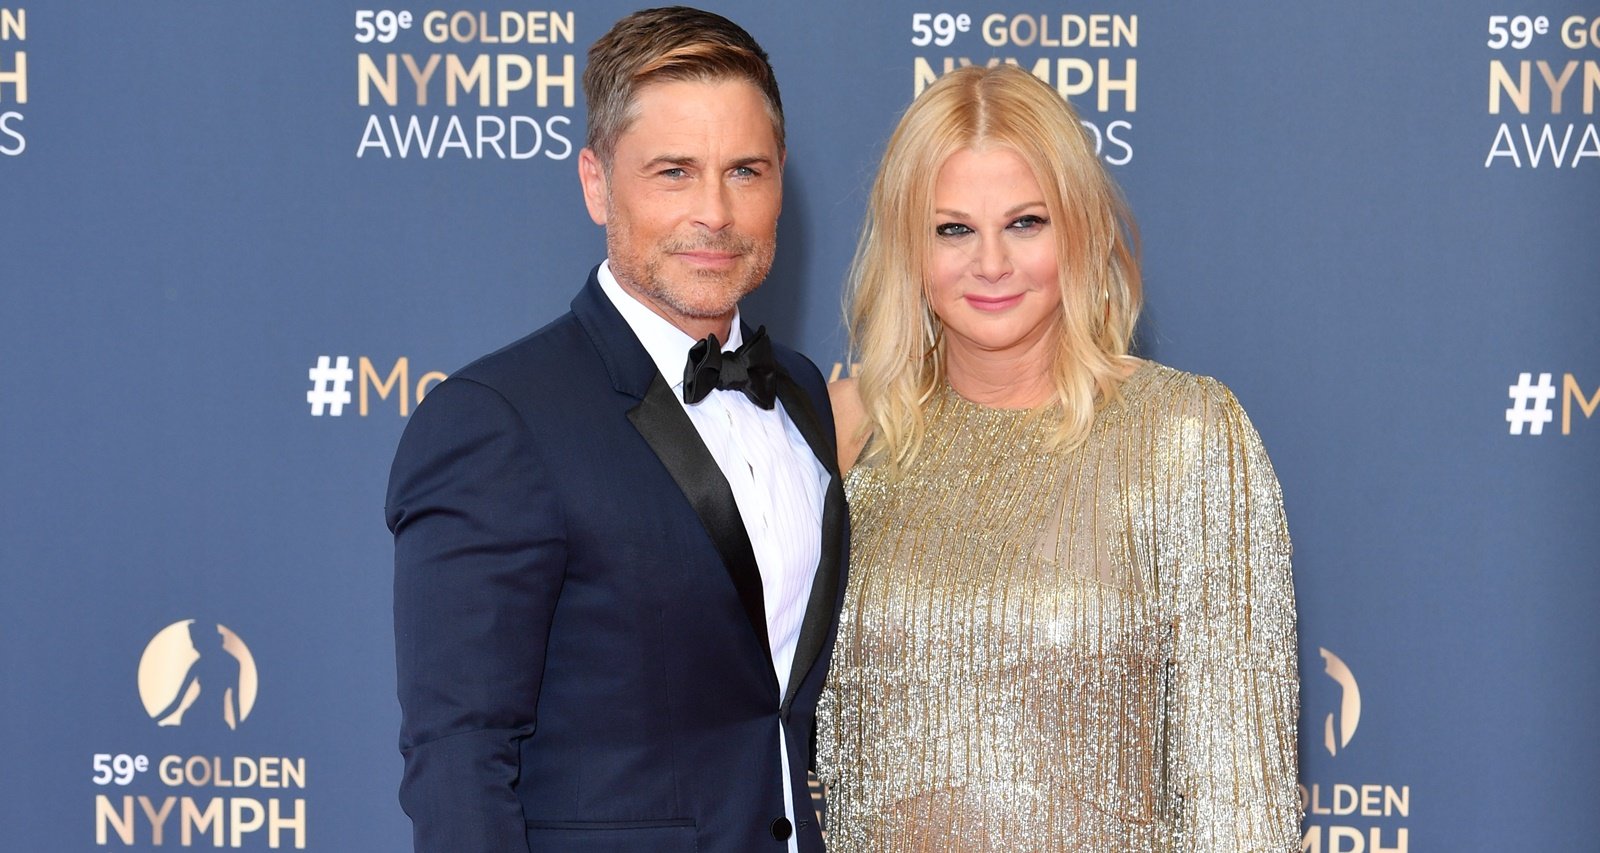 Rob Lowe's Wife: Sheryl Berkoff Wiki, Age, Kids and Facts About Jewelry Designer